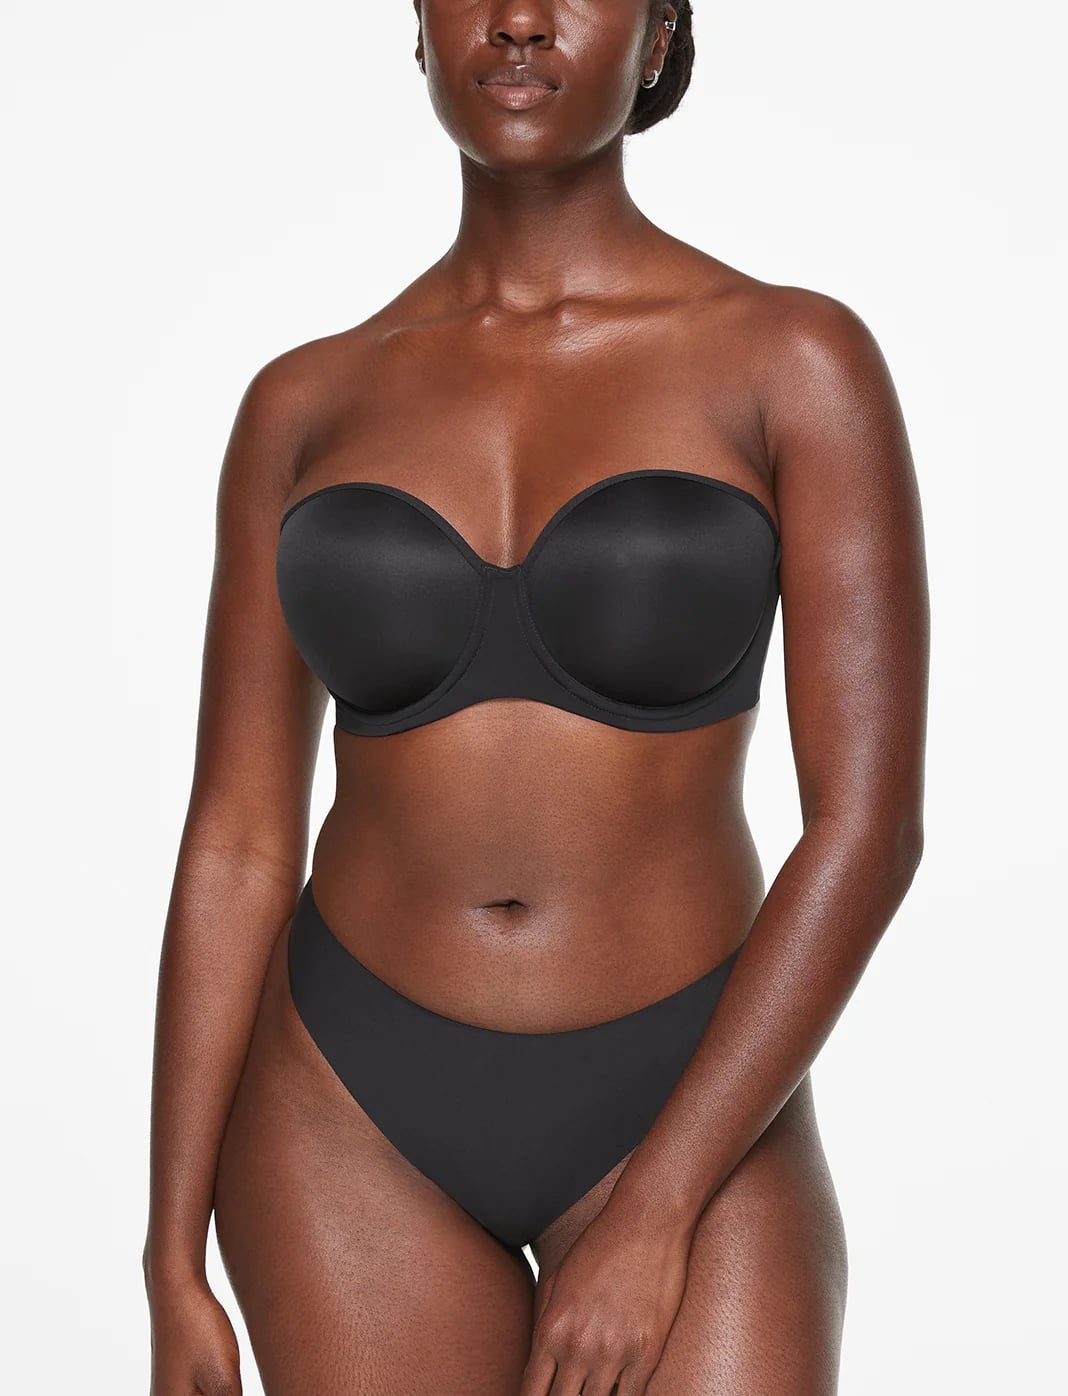 Victoria's Secret Sexy Illusions Lightly-Lined Strapless Bra